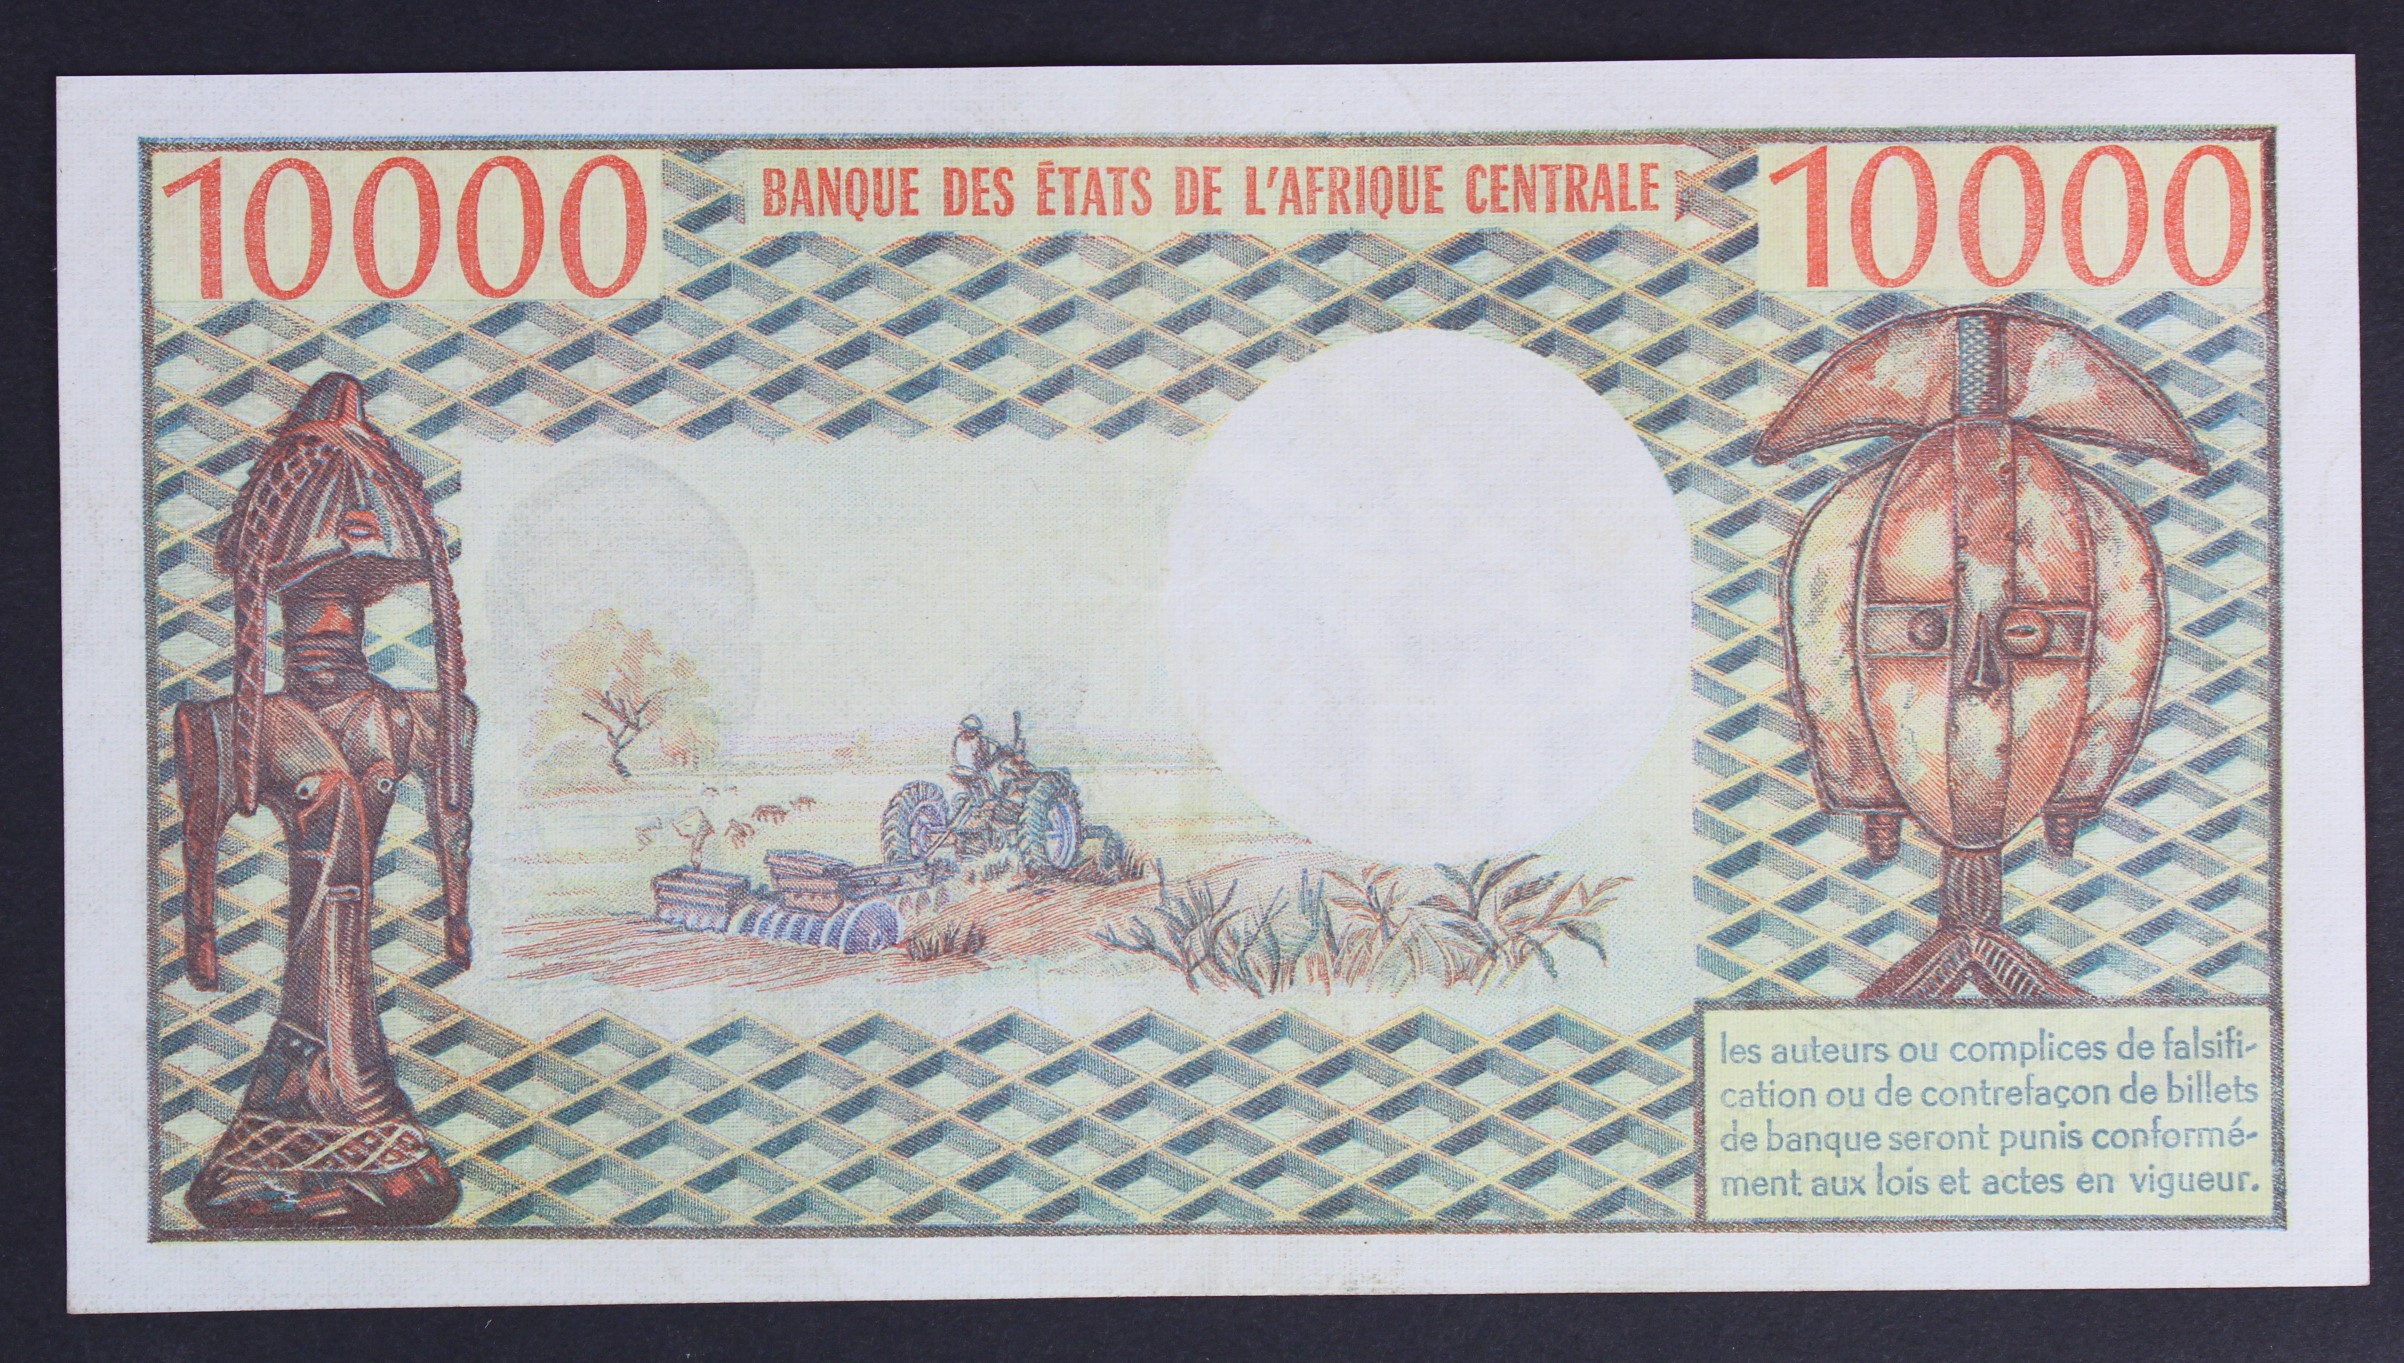 Central African Republic 10000 Francs issued 1976, portrait President J.B. Bokassa at right, - Image 2 of 2